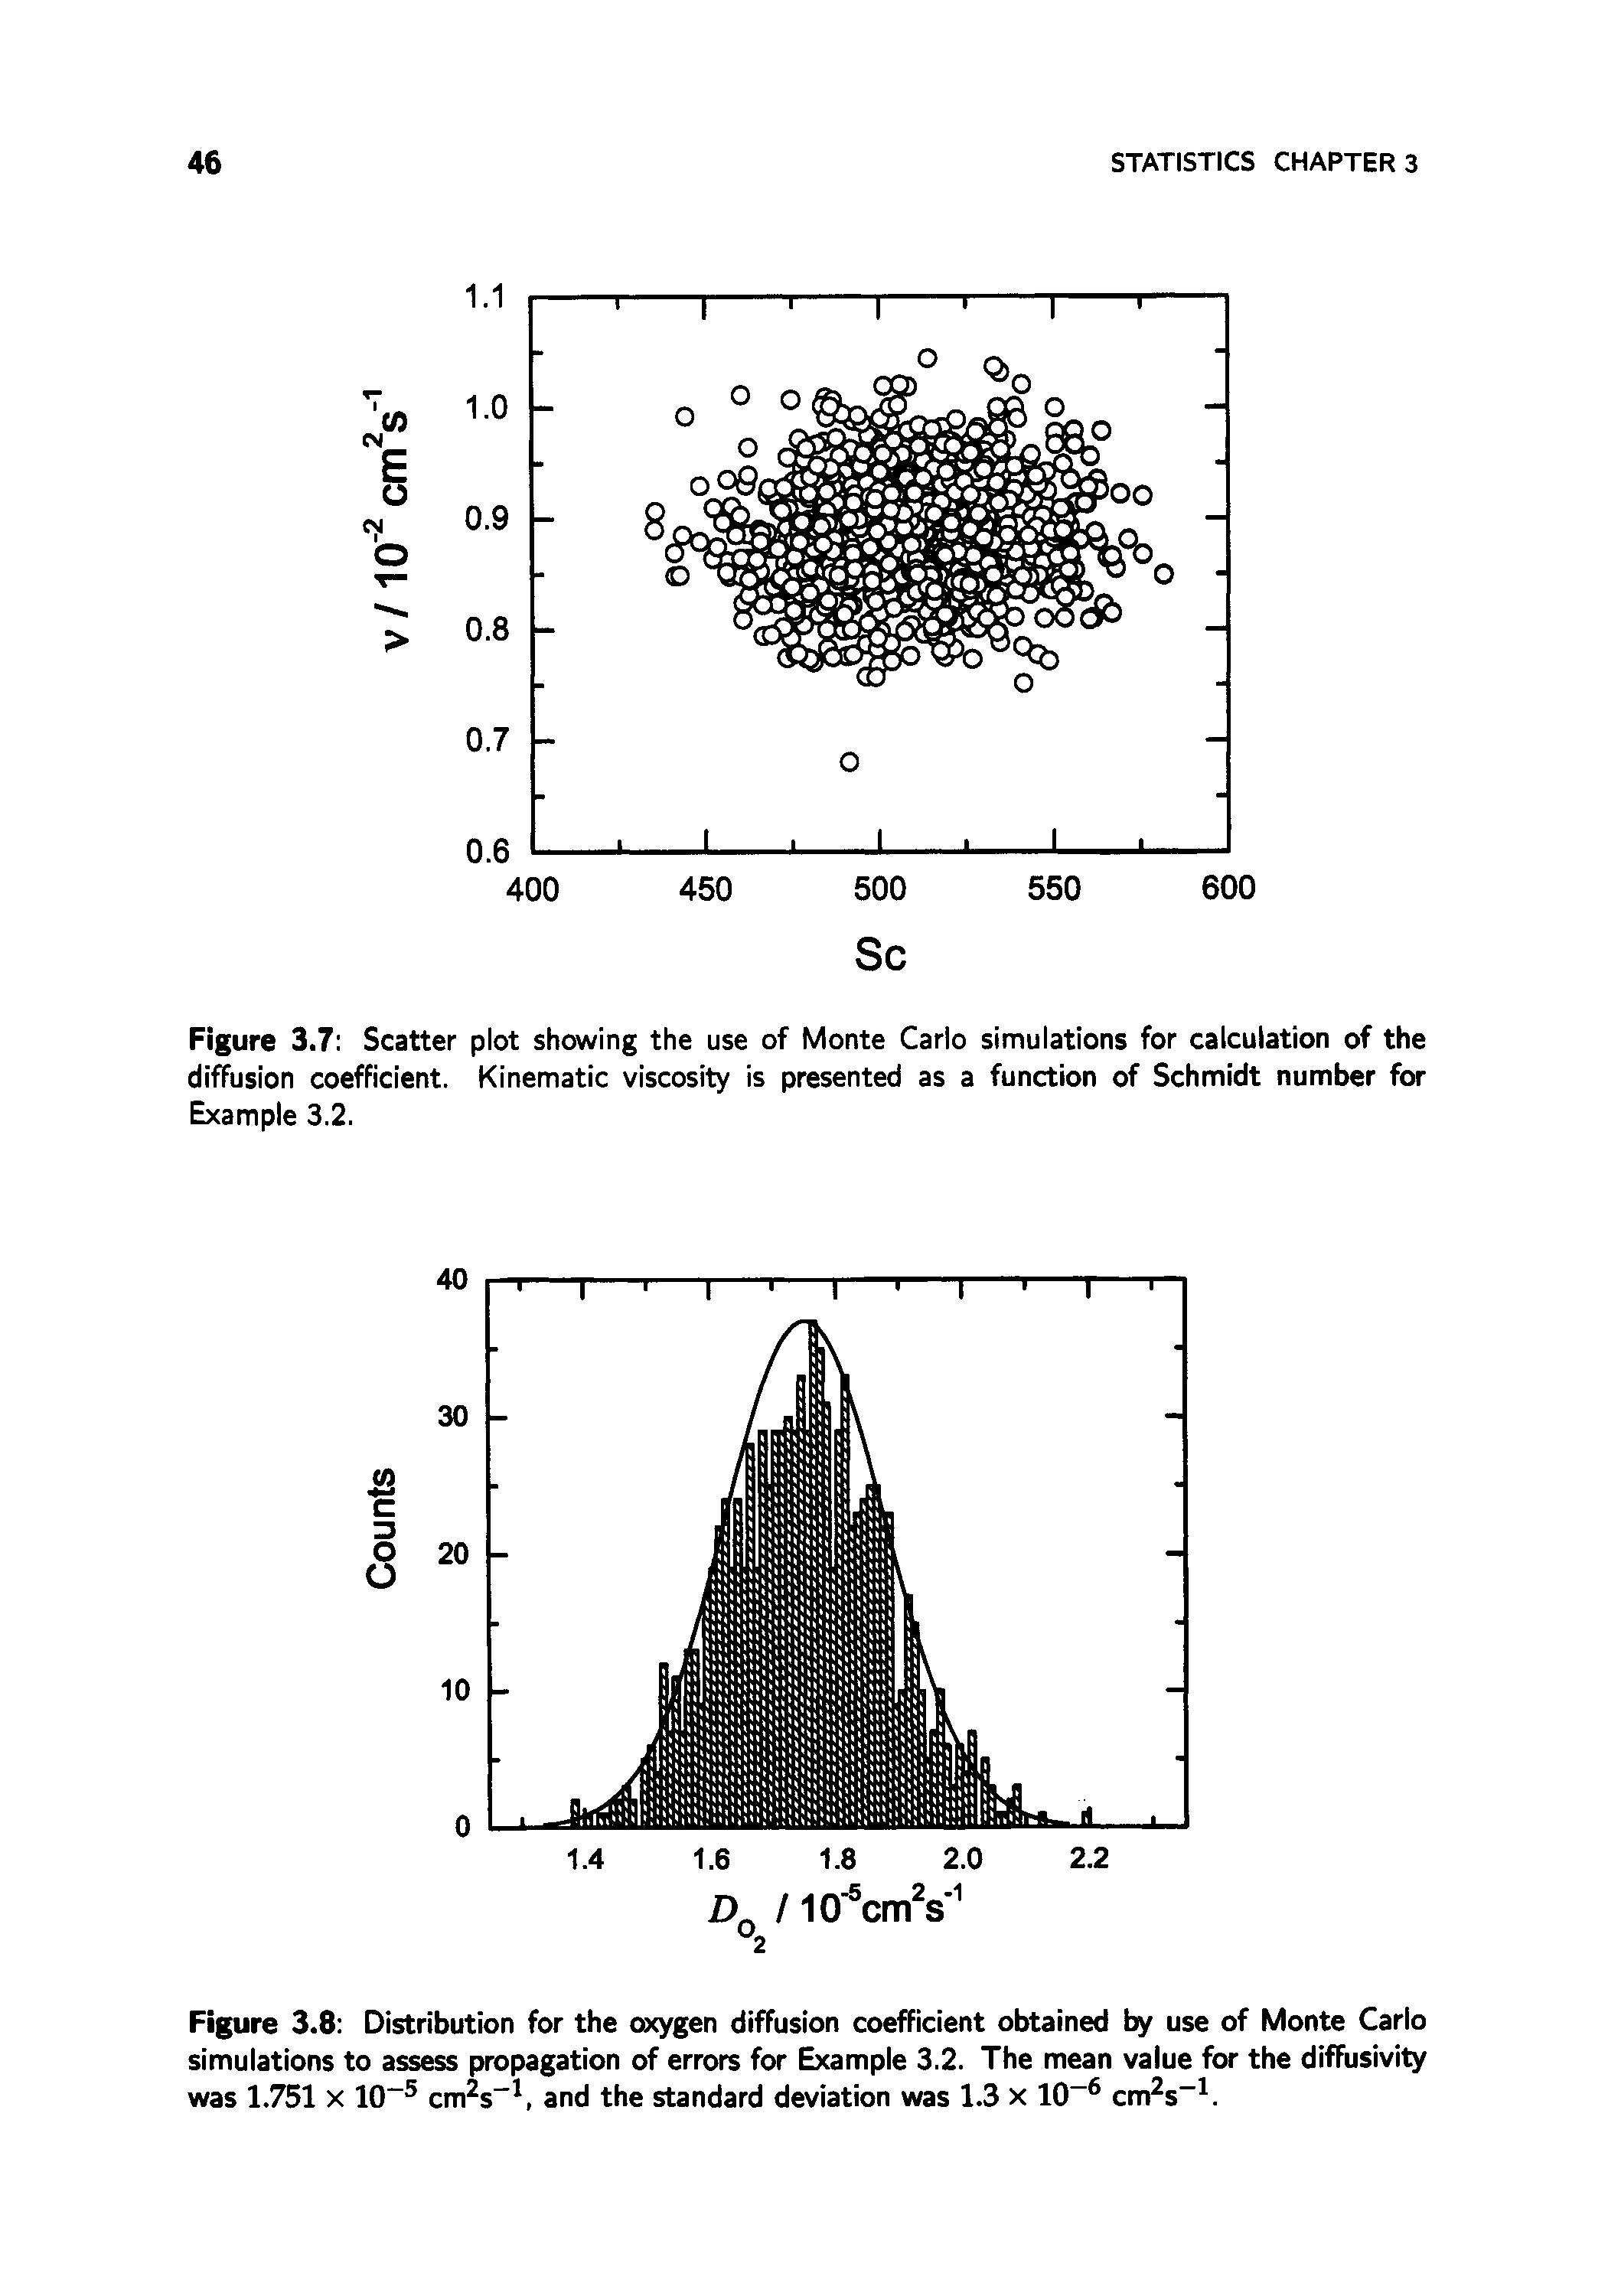 Figure 3.8 Distribution for the oxygen diffusion coefficient obtained by use of Monte Carlo simulations to assess propagation of errors for Example 3.2. The mean value for the diffusivity was 1.751 X 10 cm s" and the standard deviation was 1.3 x 10 cm s . ...